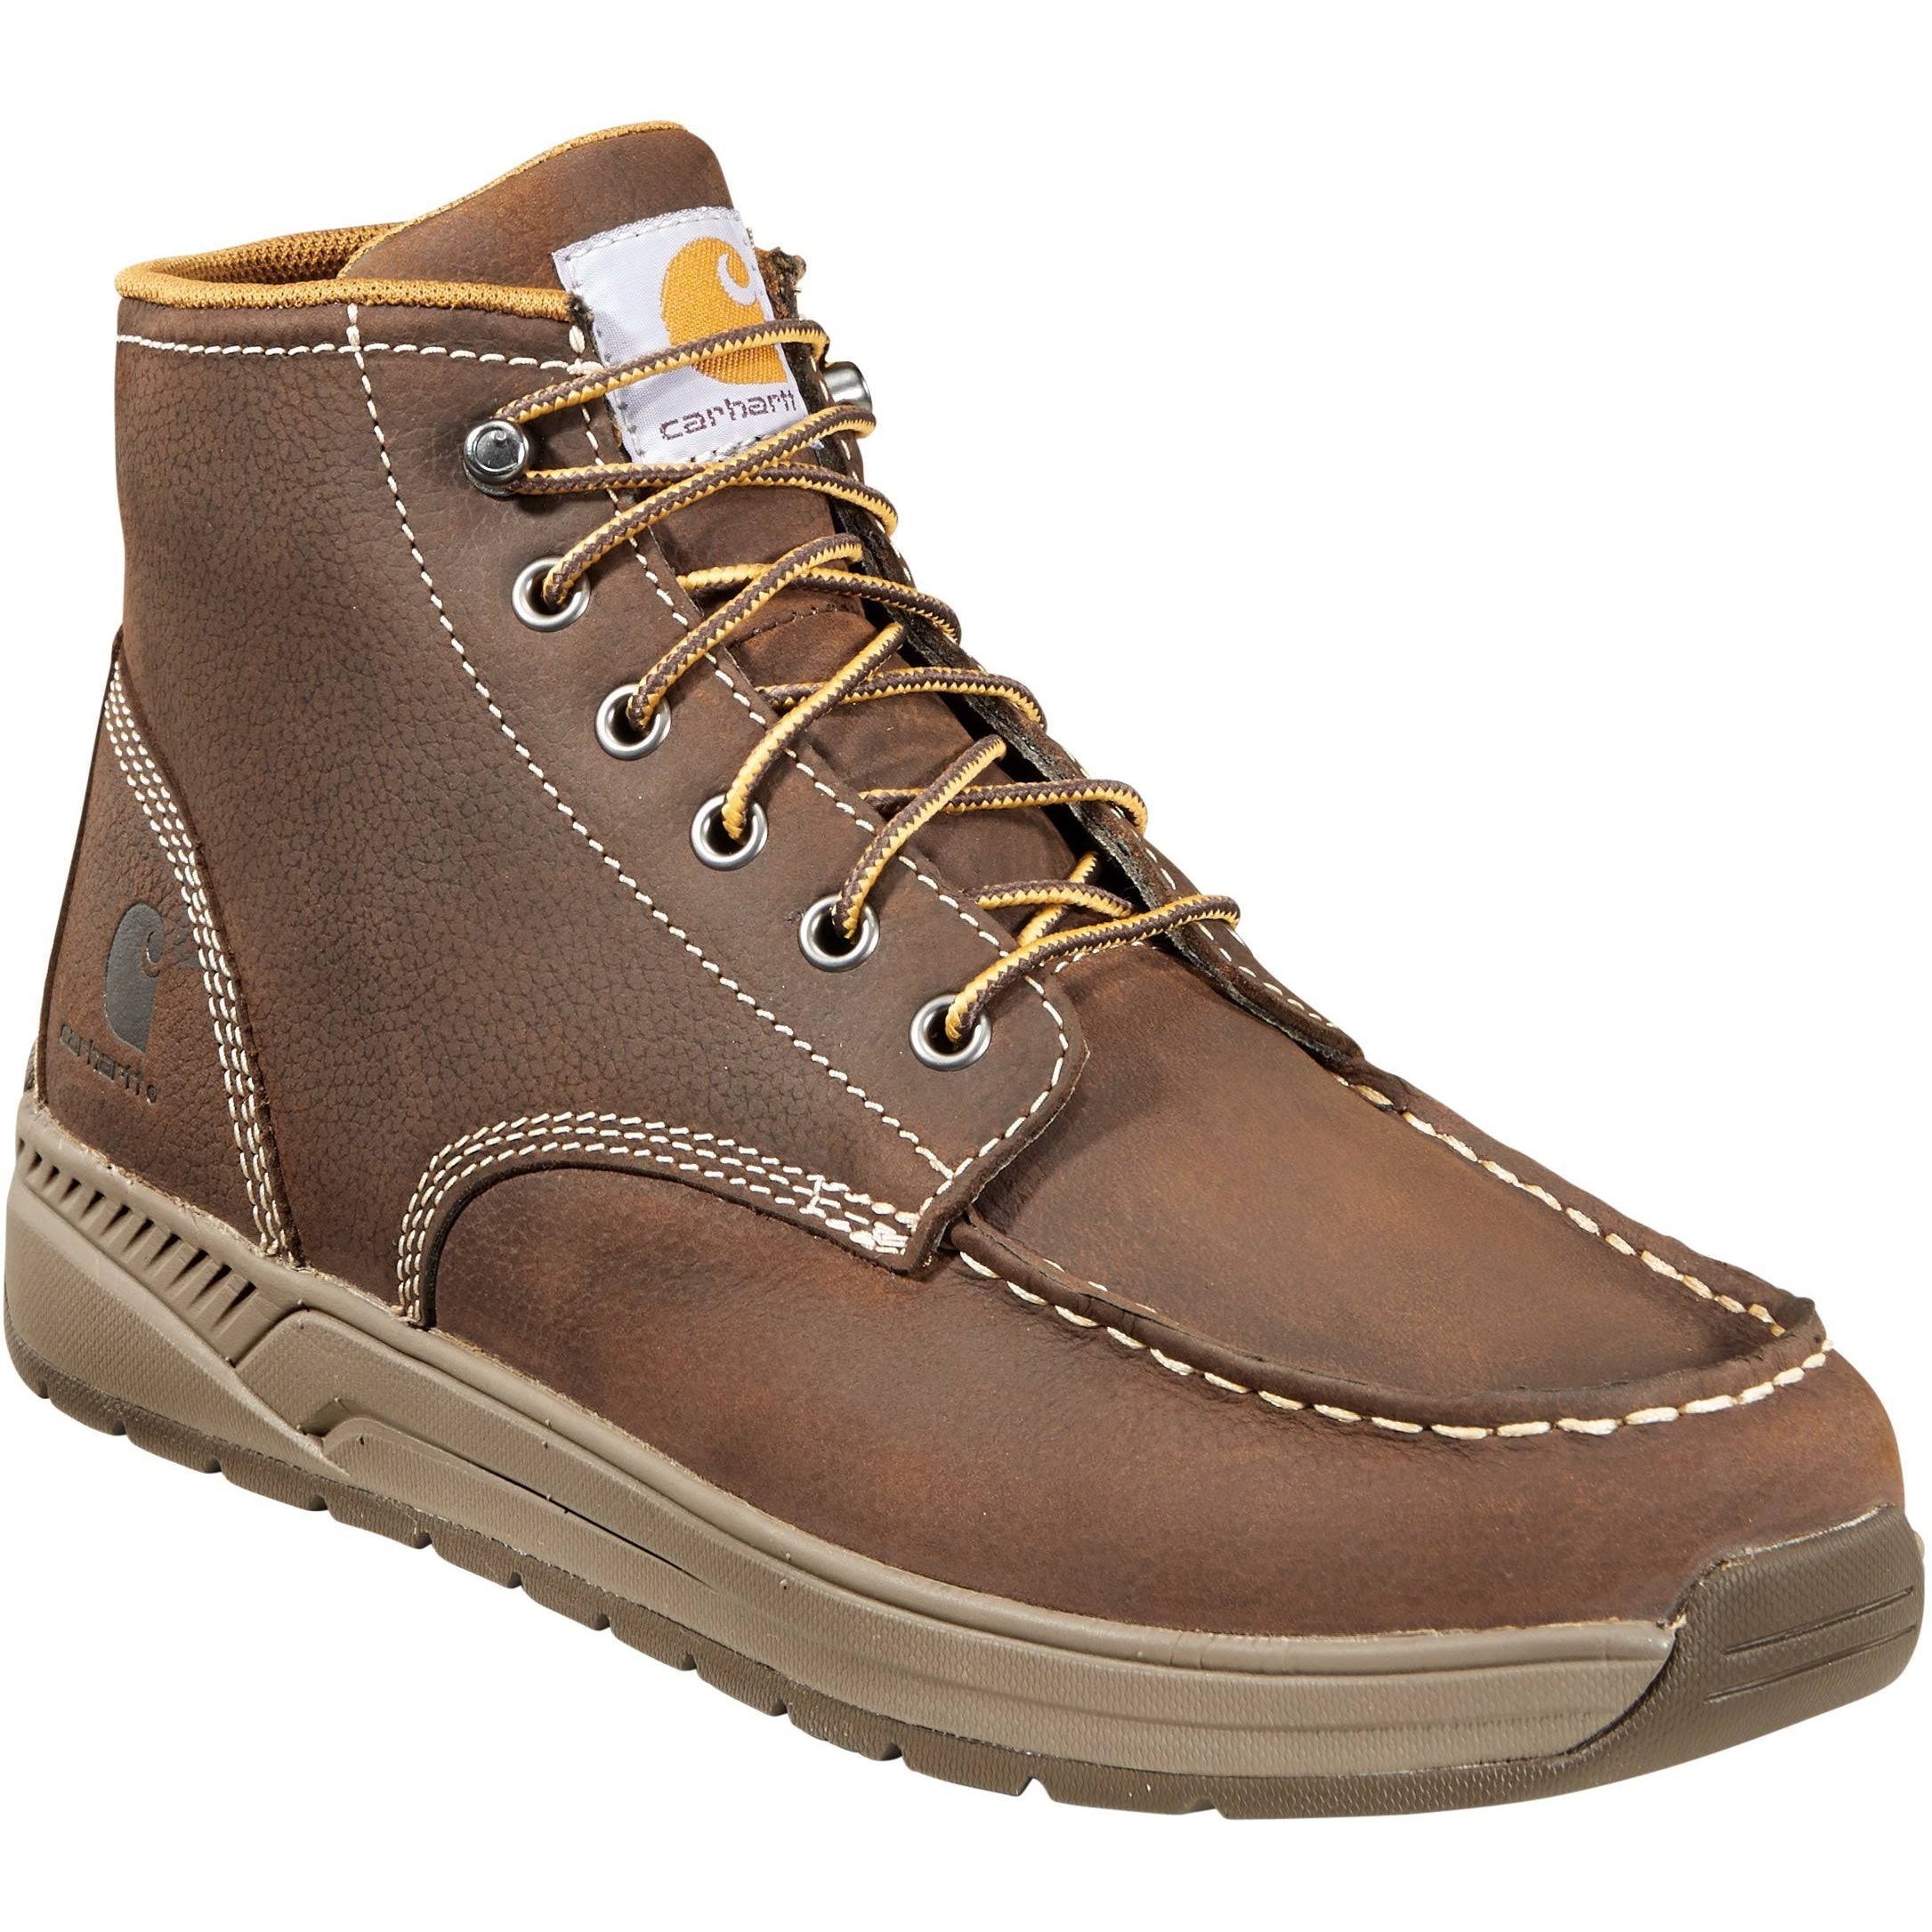 Carhartt Mens Lightweight Casual Wedge 4 Inches Soft Moc Toe Ankle Boots - Brown, 9 US